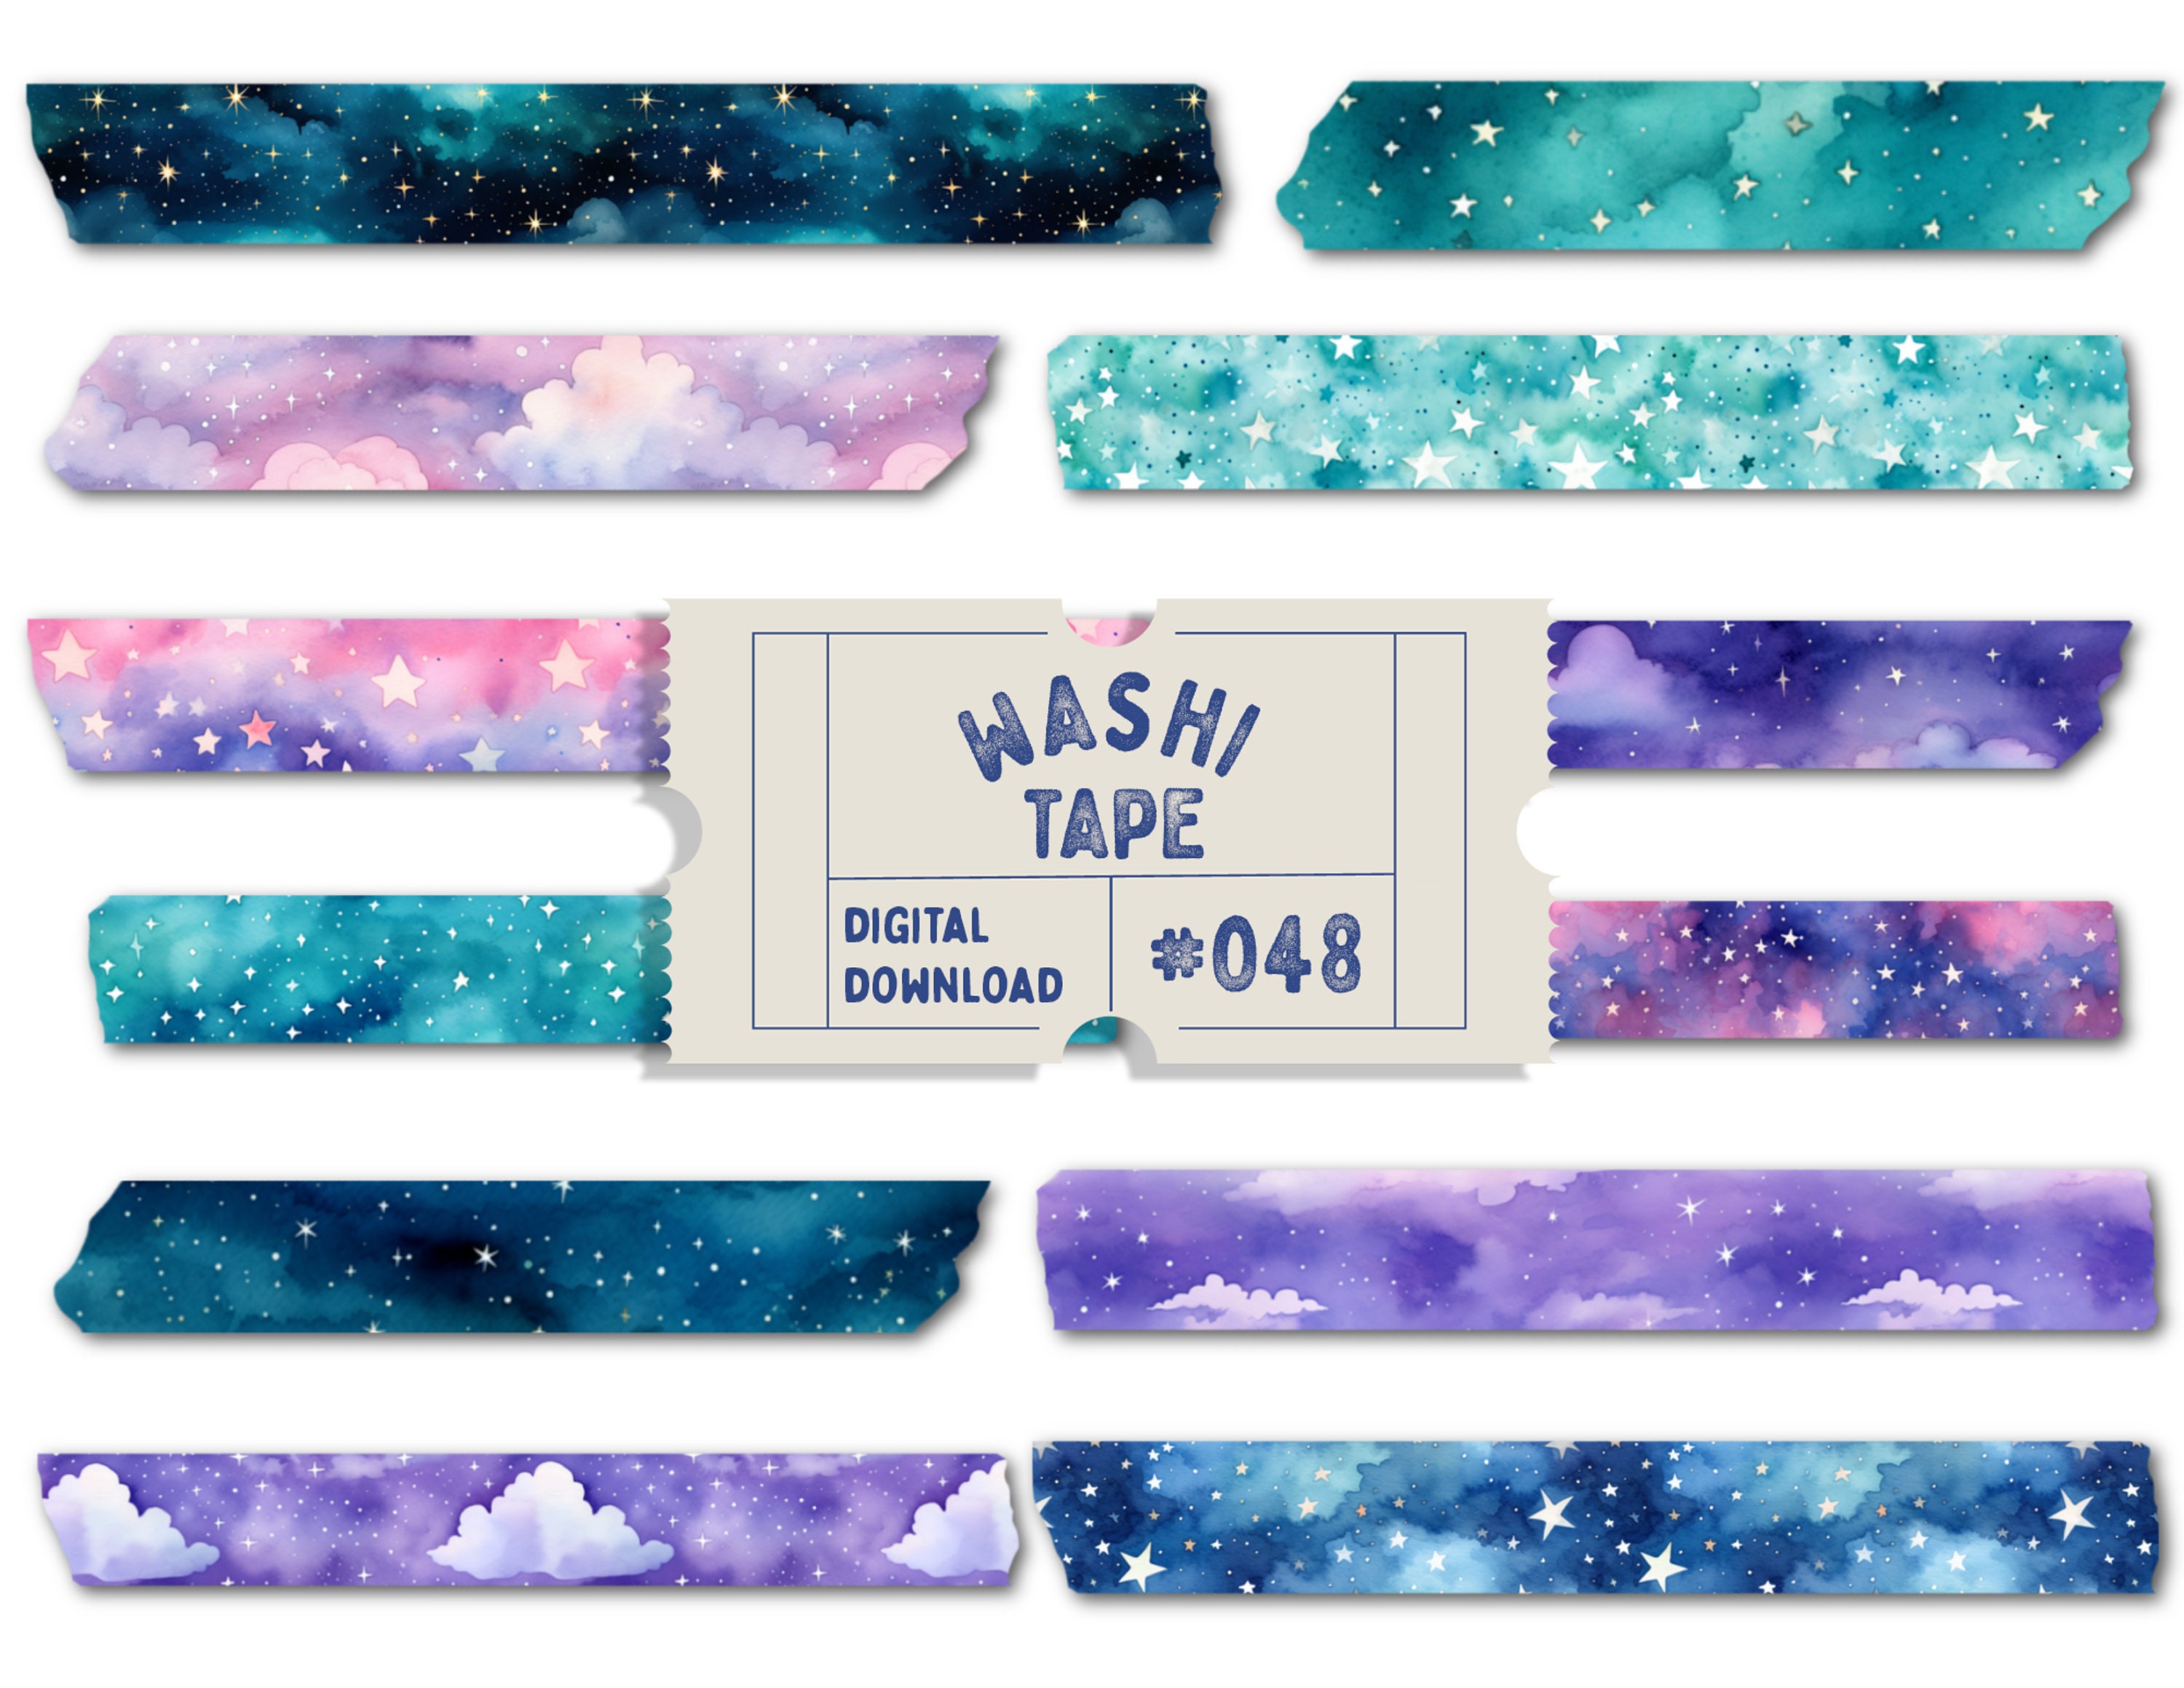 Silver Foil Celestial Washi Tape / Starry Night Washi / Moon and Planets /  Decorative Masking Tape / Gift for Crafter / Galaxy Washi Tape 